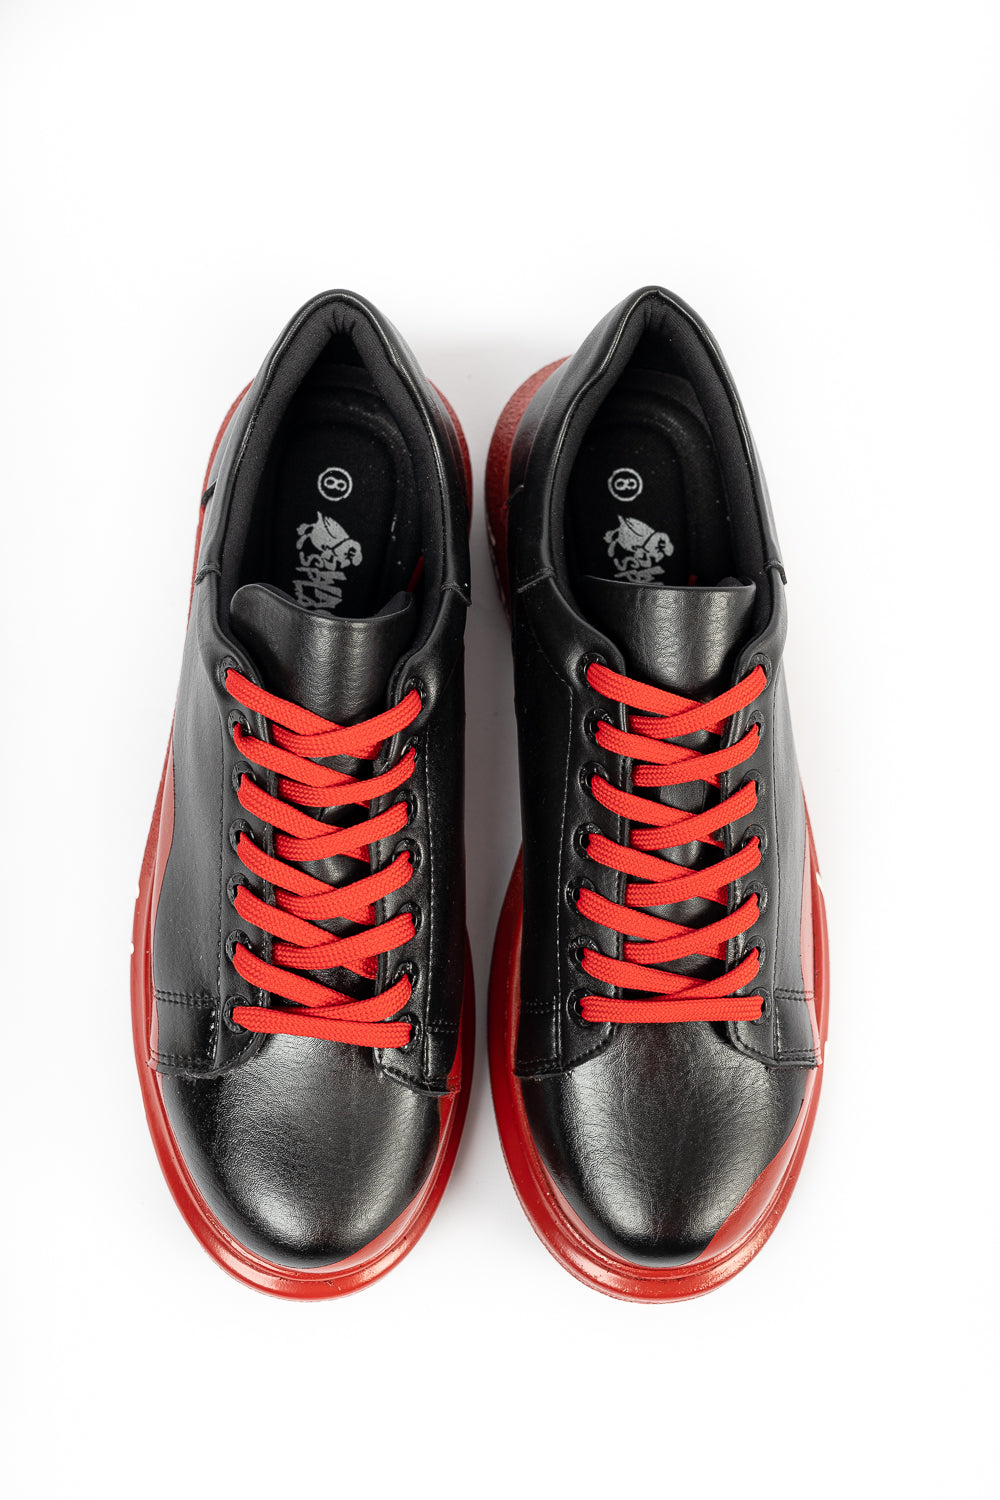 Rogue Red - Swagg Splash Sneakers